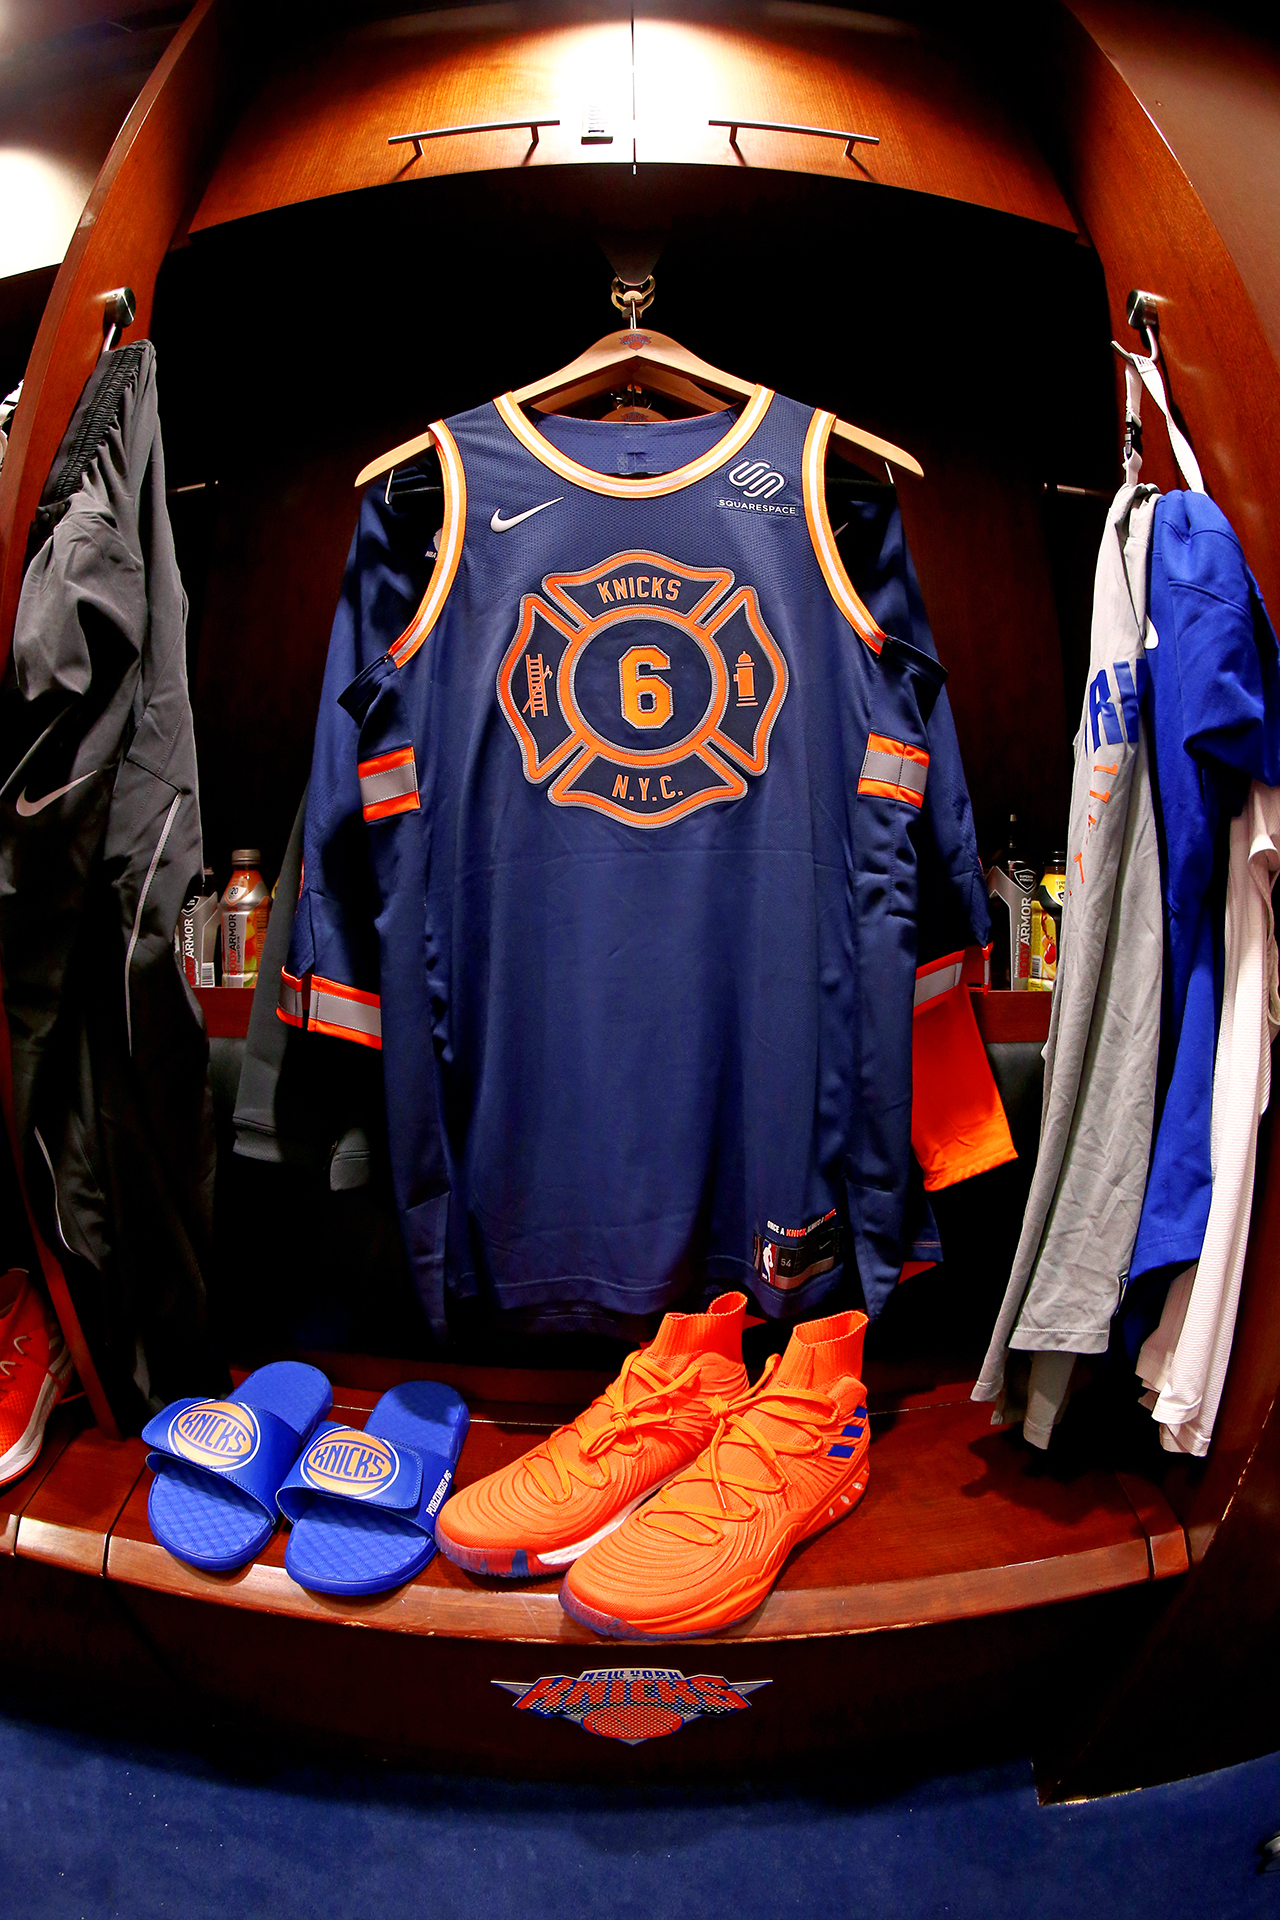 Knicks Unveil City Edition Uniforms Paying Homage to Firefighters & Their  Families